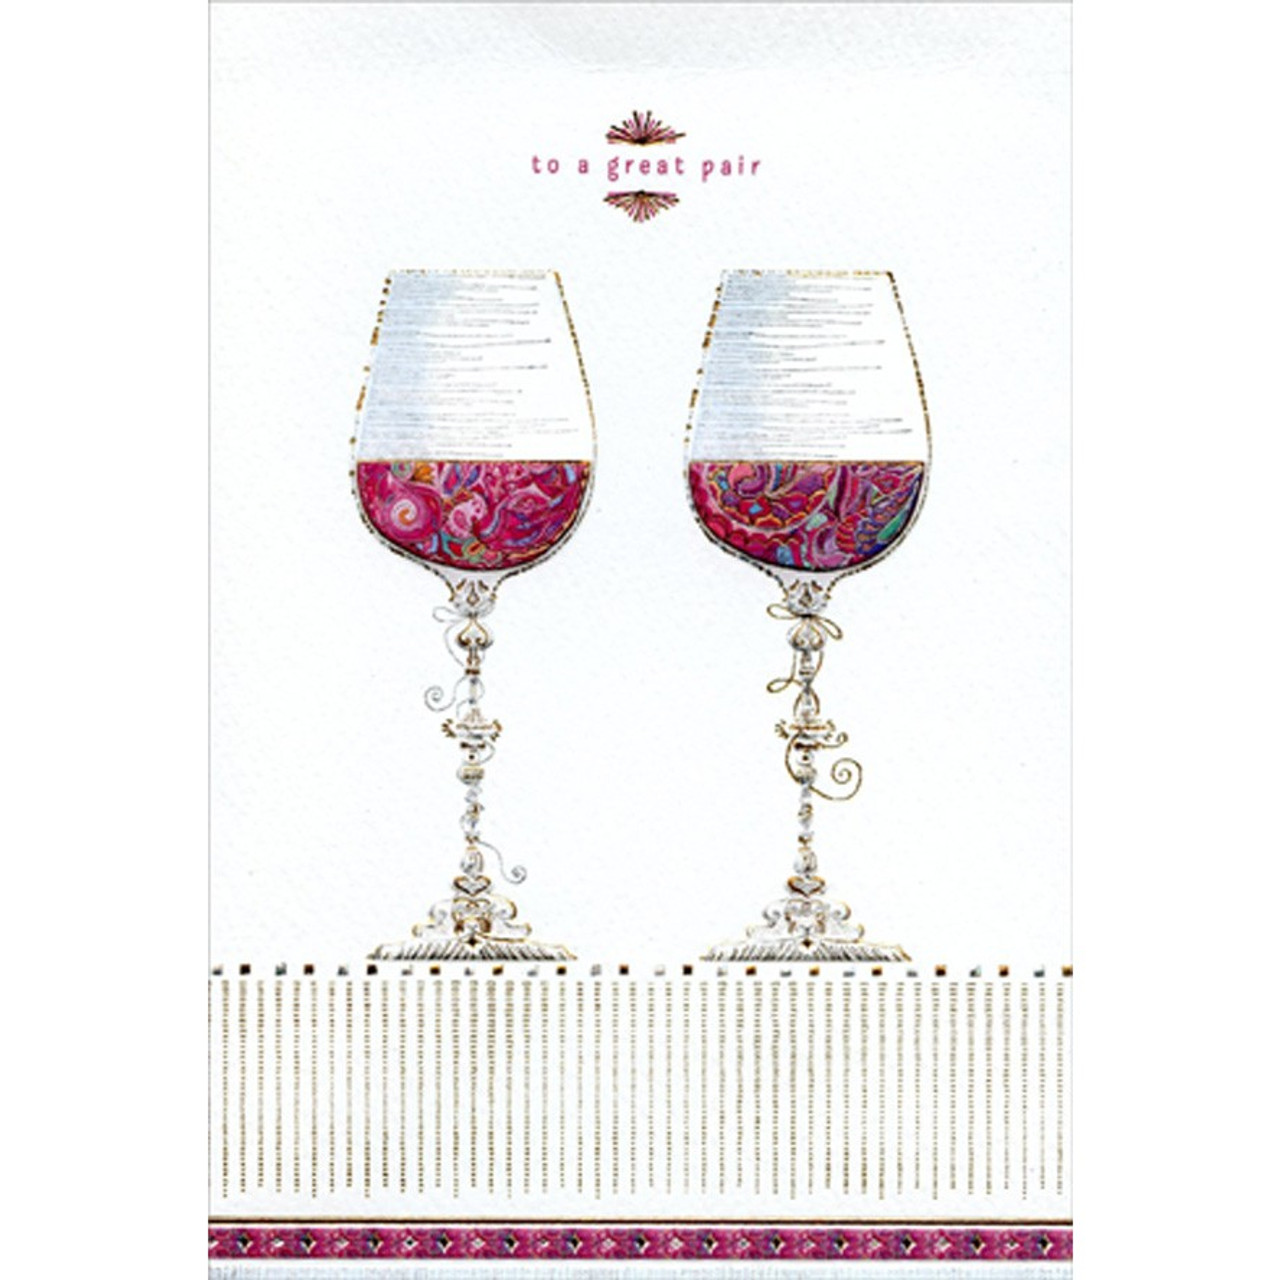 https://cdn11.bigcommerce.com/s-o3ewkiqyx3/images/stencil/1280x1280/products/9732/20329/cd13793-great-pair-fancy-wine-glasses-michele-frusciano-two-twenty-two-anniversary-card__93053.1656460796.jpg?c=1